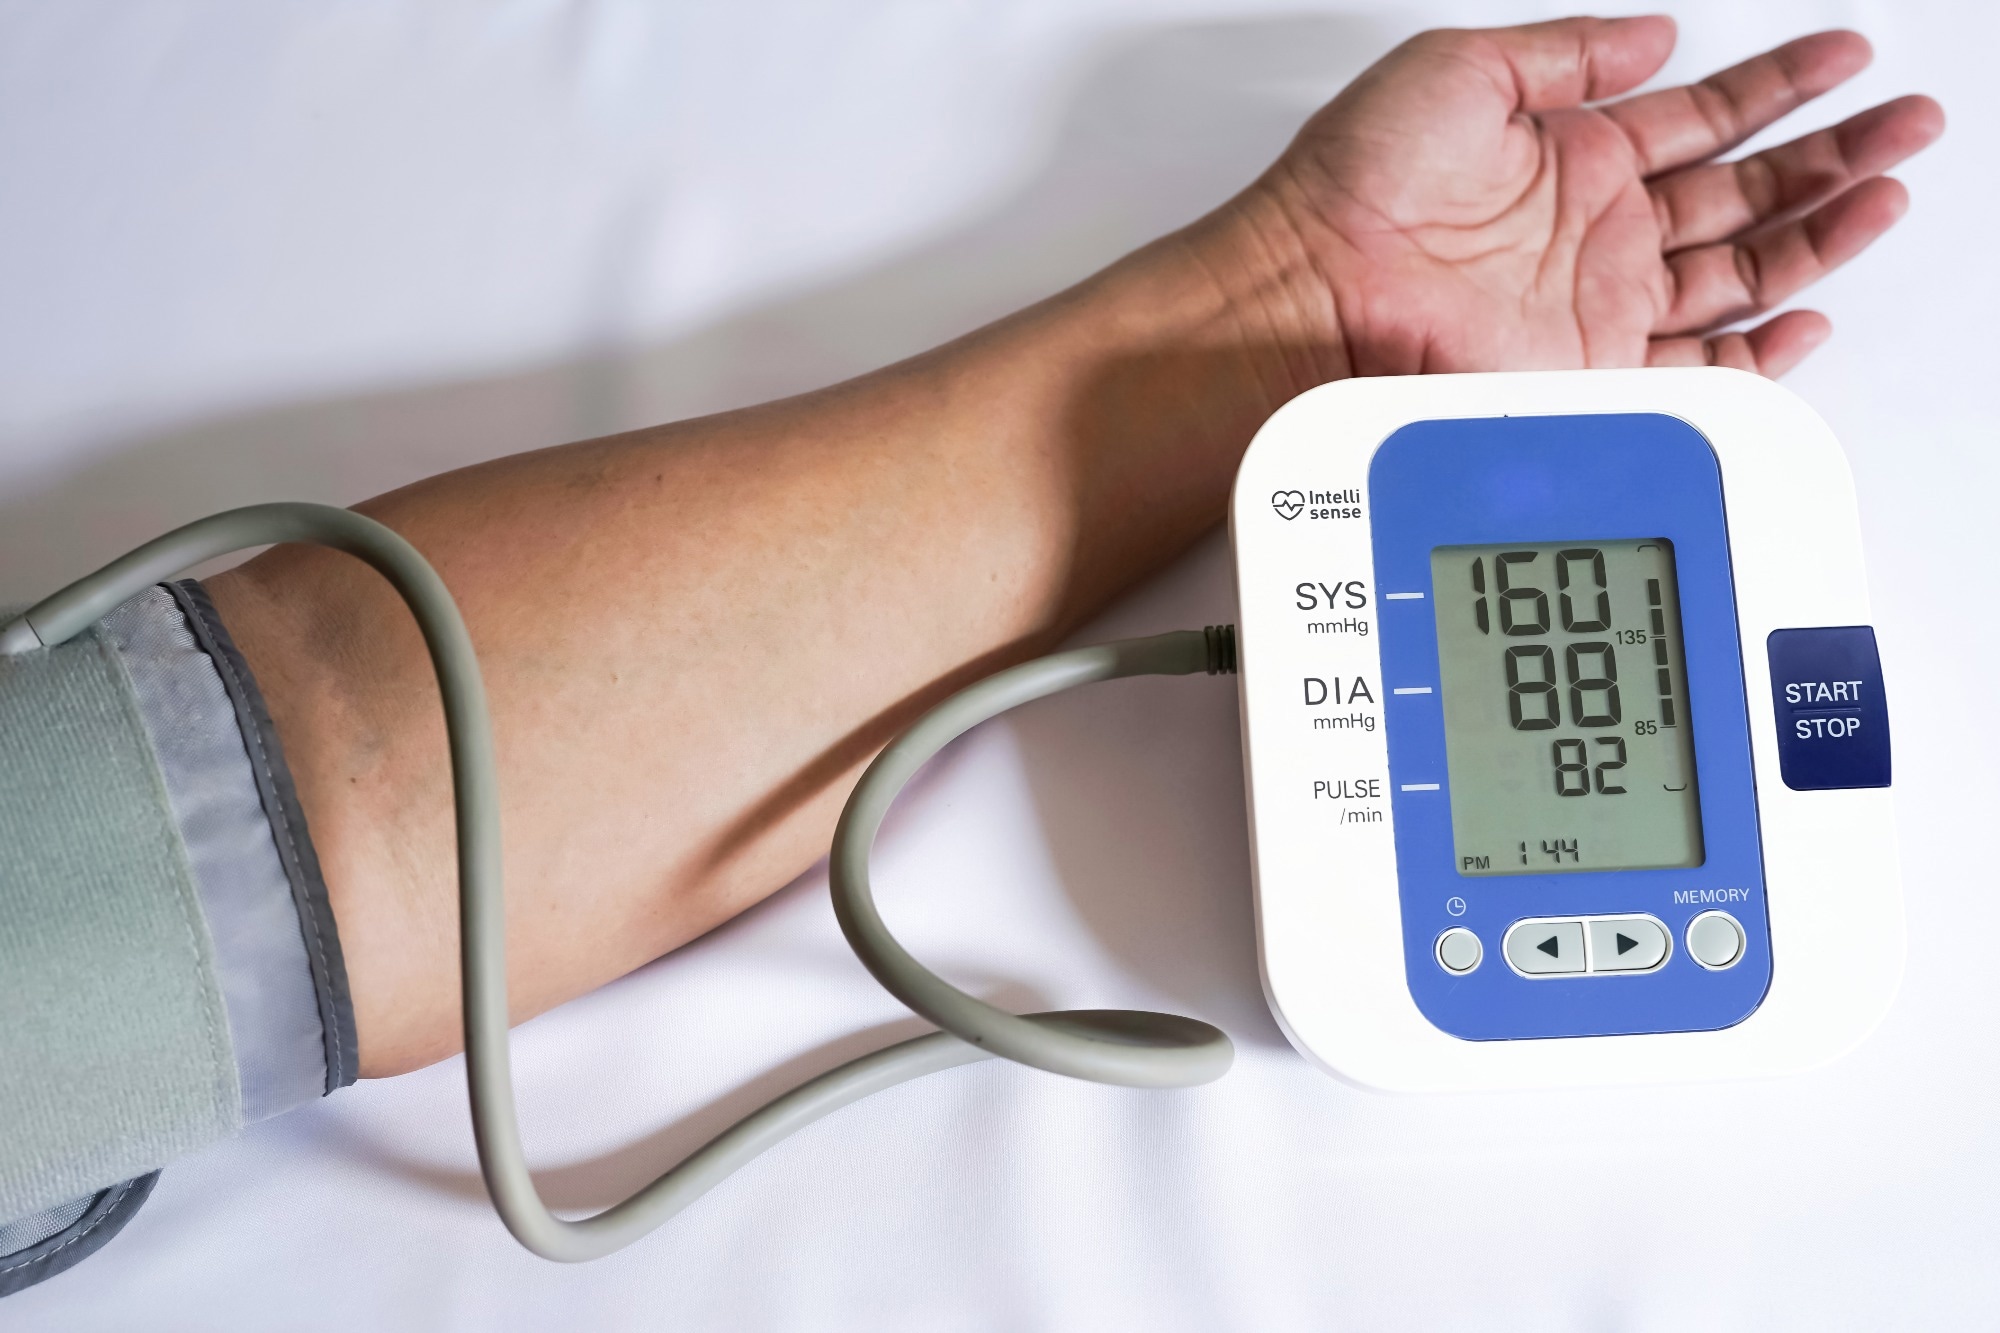 How does alcohol affect blood pressure?